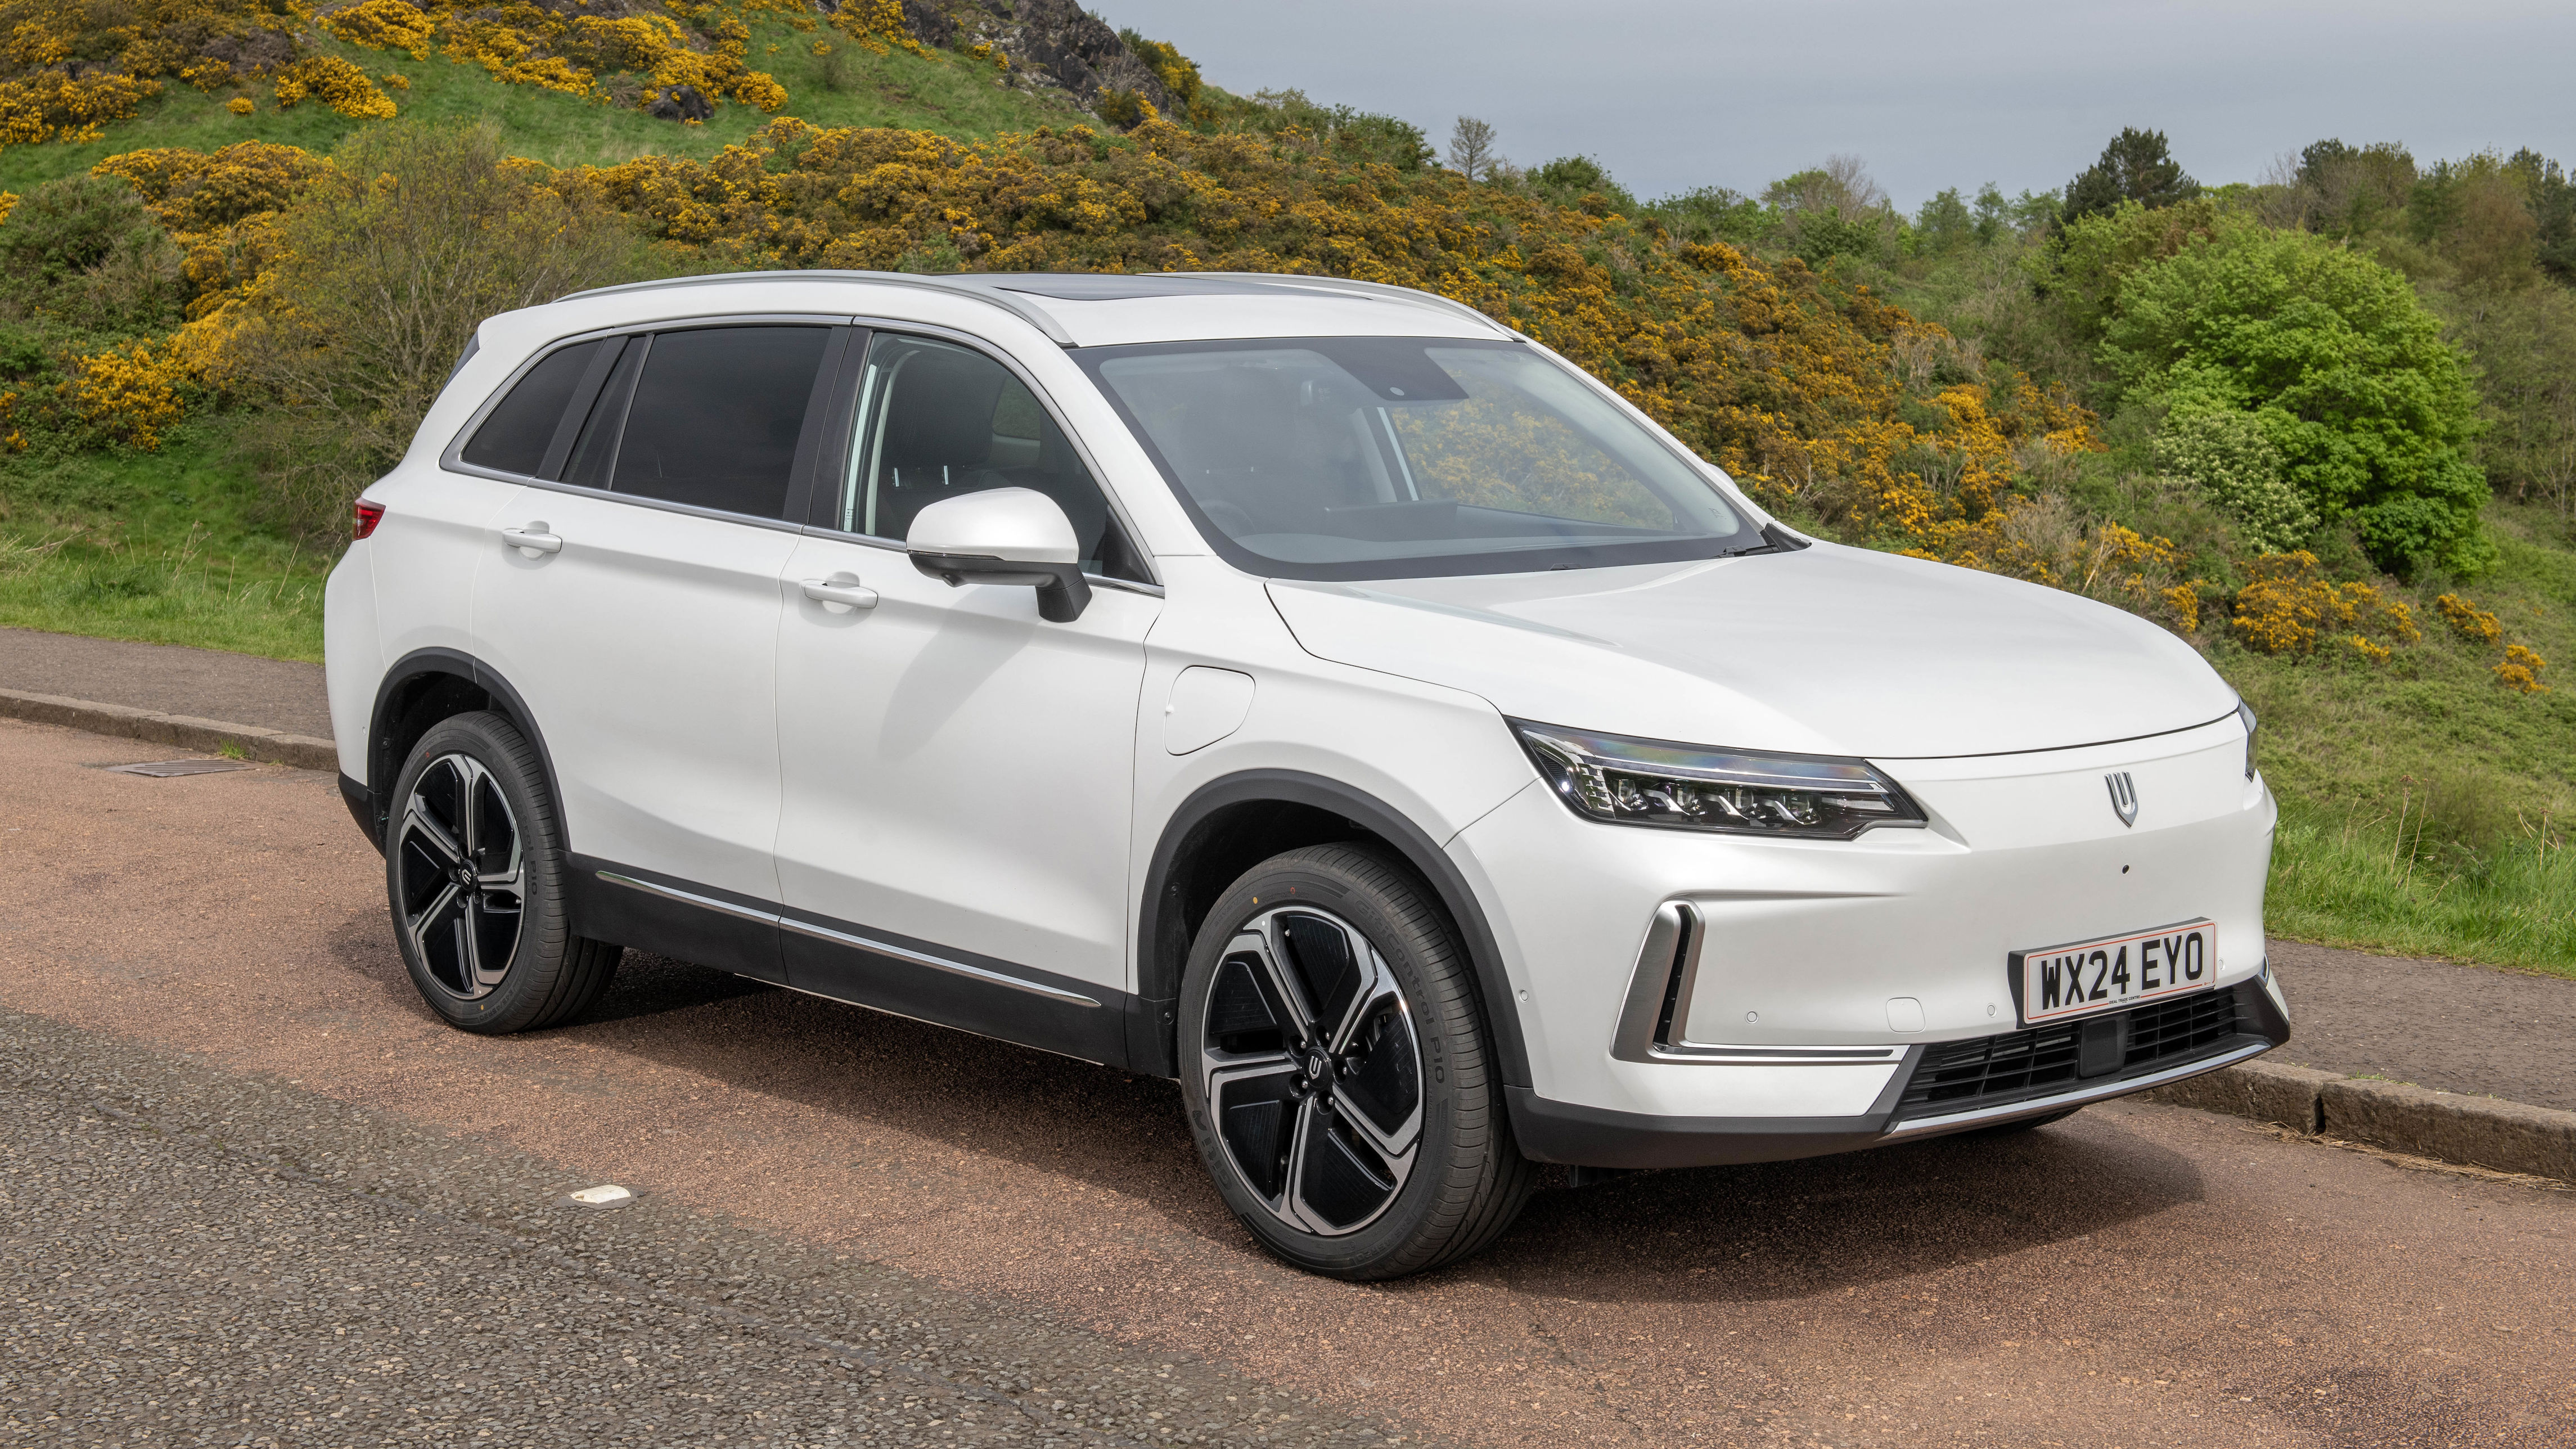 the skywell be11 is a mid-size electric suv that’ll reach the uk later this year